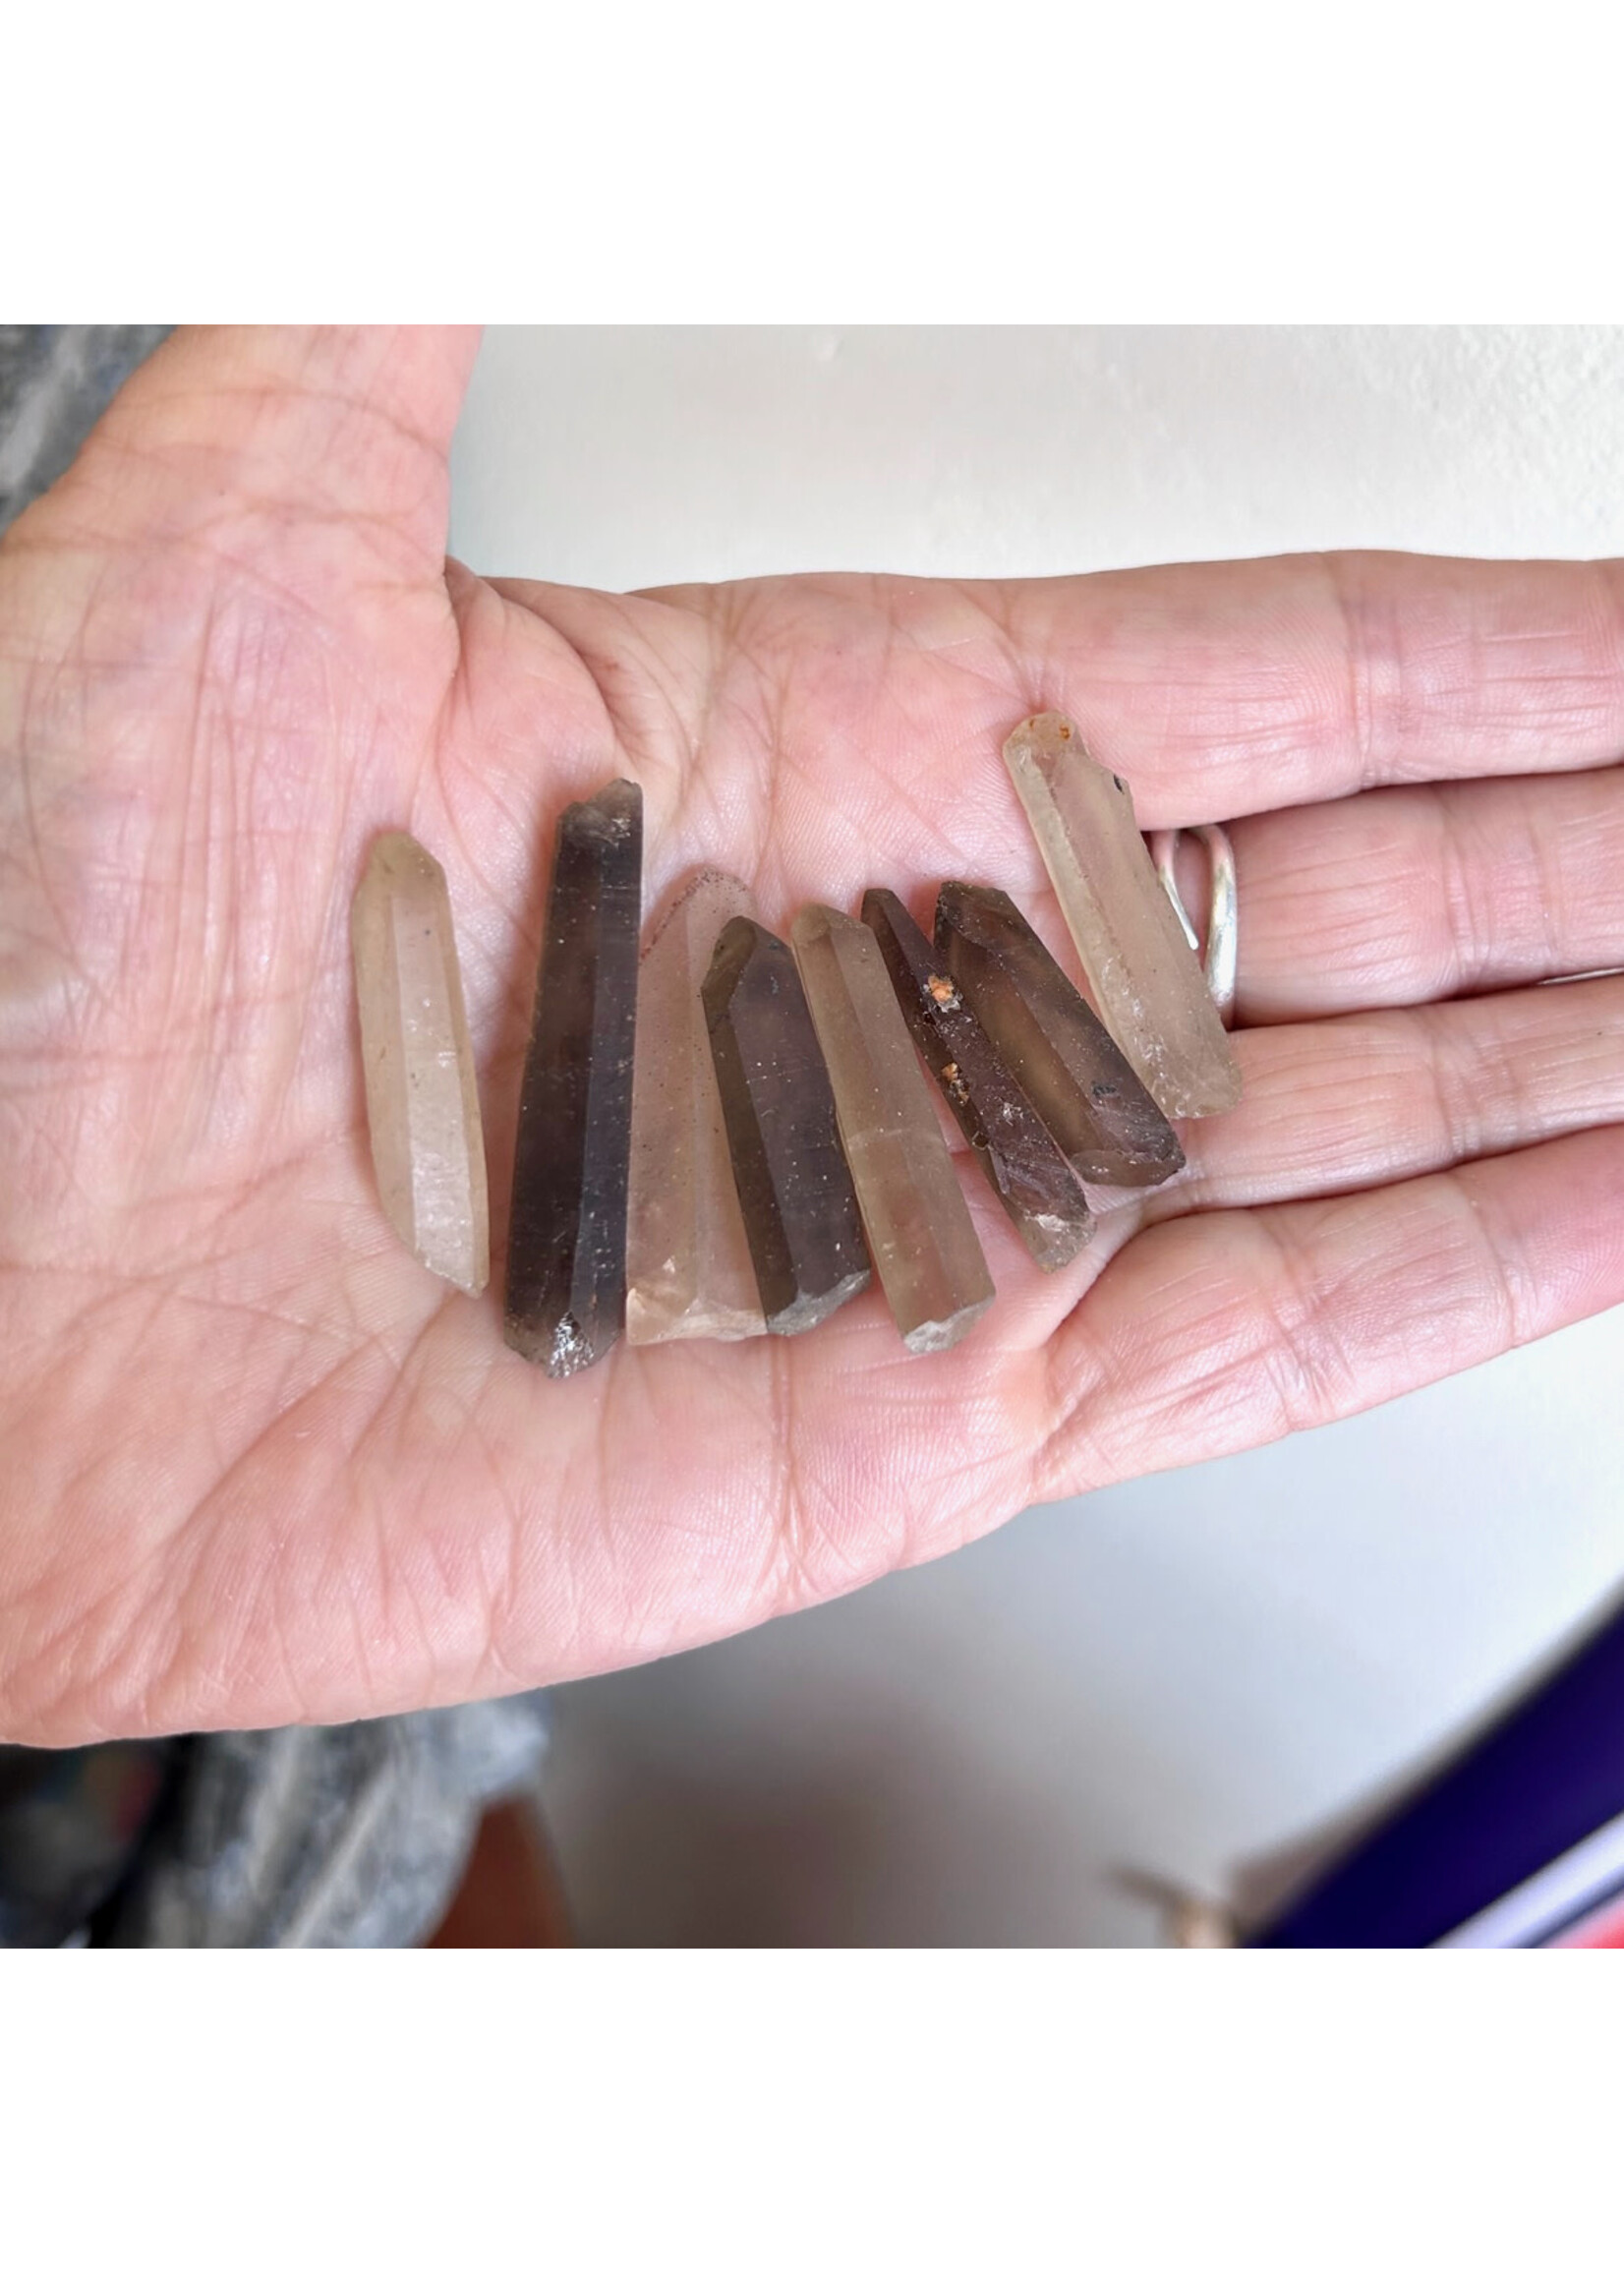 Smoky Citrine Points Rough Tumbled for living prosperously